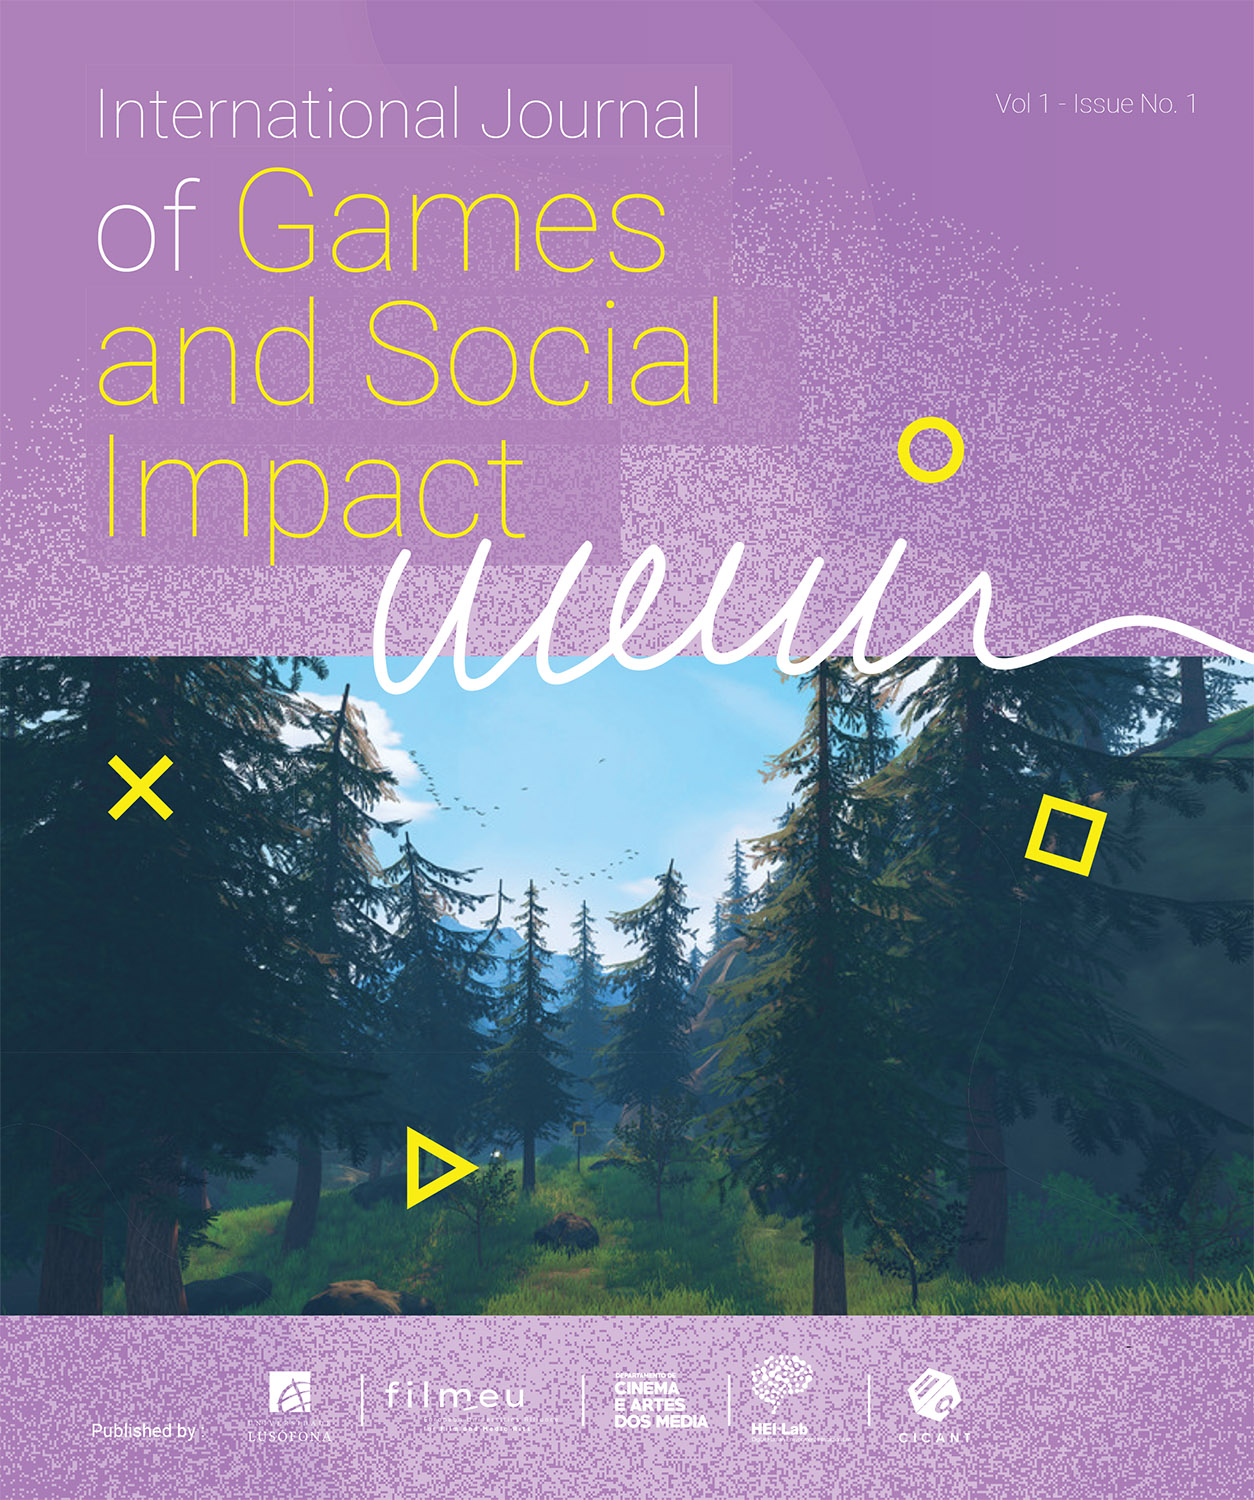 The image has a purple background with white highlights. In the upper left corner in white and yellow "International Journal of Games and Social Impact". In the upper right corner, in white, the text "Vol. 1 - Issue No. 1". Below a image of a forest, taken from a digital game's art and some yellow geometric forms. In the bottom of the page, in white, a list of logos from: Universidade Lusófona, FILMEU, Departamento de Cinema e Artes dos Media, HEI-Lab and CICANT.